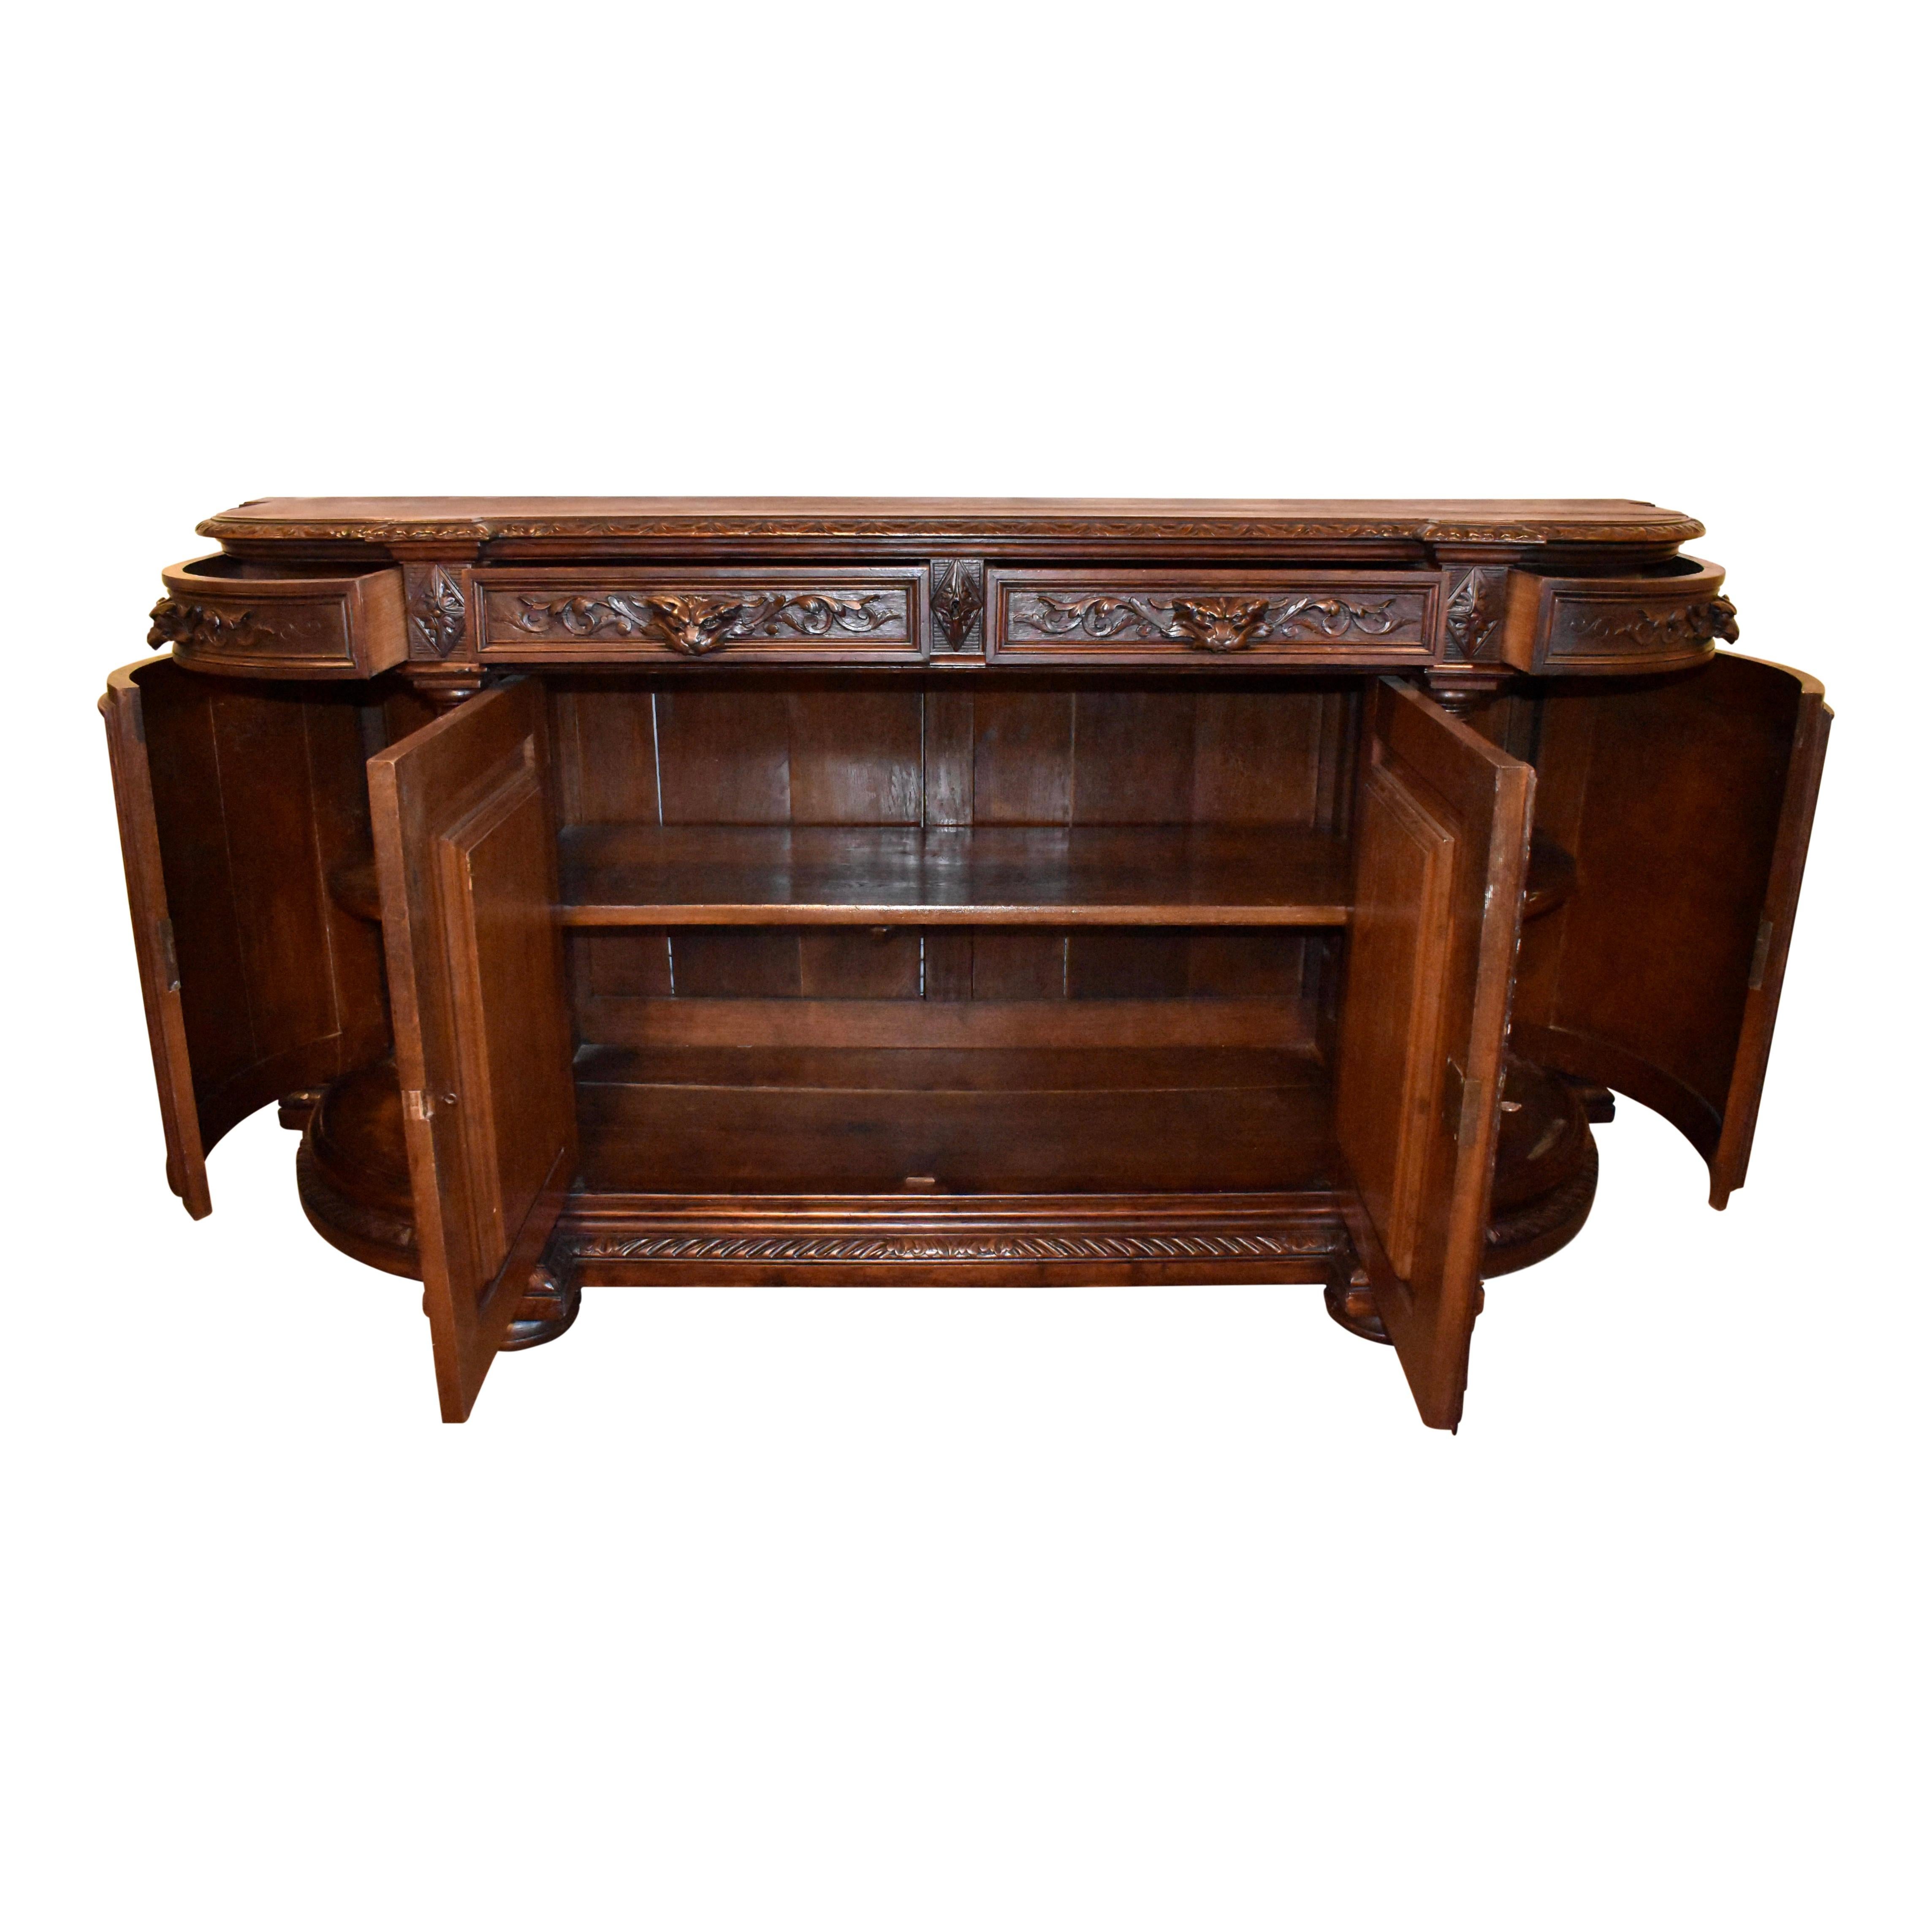 Fine craftsmanship and lavish carvings abound in this handsome Renaissance Revival sideboard, which was created in France in the late-19th century from European oak and finished with a rich, dark stain. Bowed at the sides, the sideboard's top is